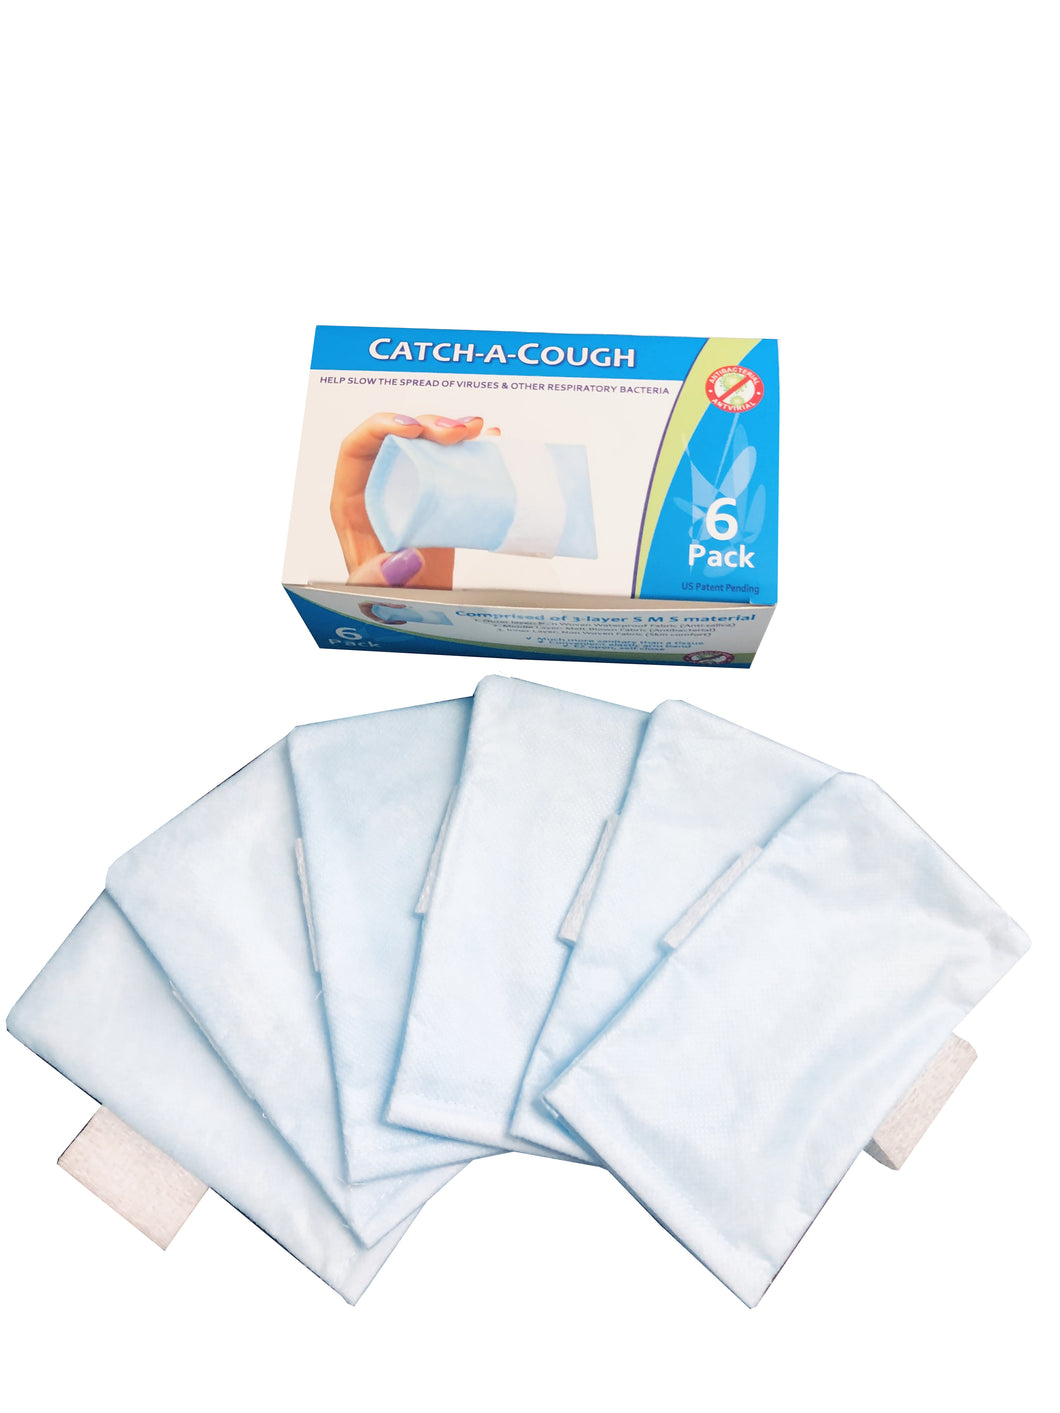 Catch-A-Cough, The USA Patented Comfortable Sanitary Cough Mask, 6 Count, by Dr. Organizer